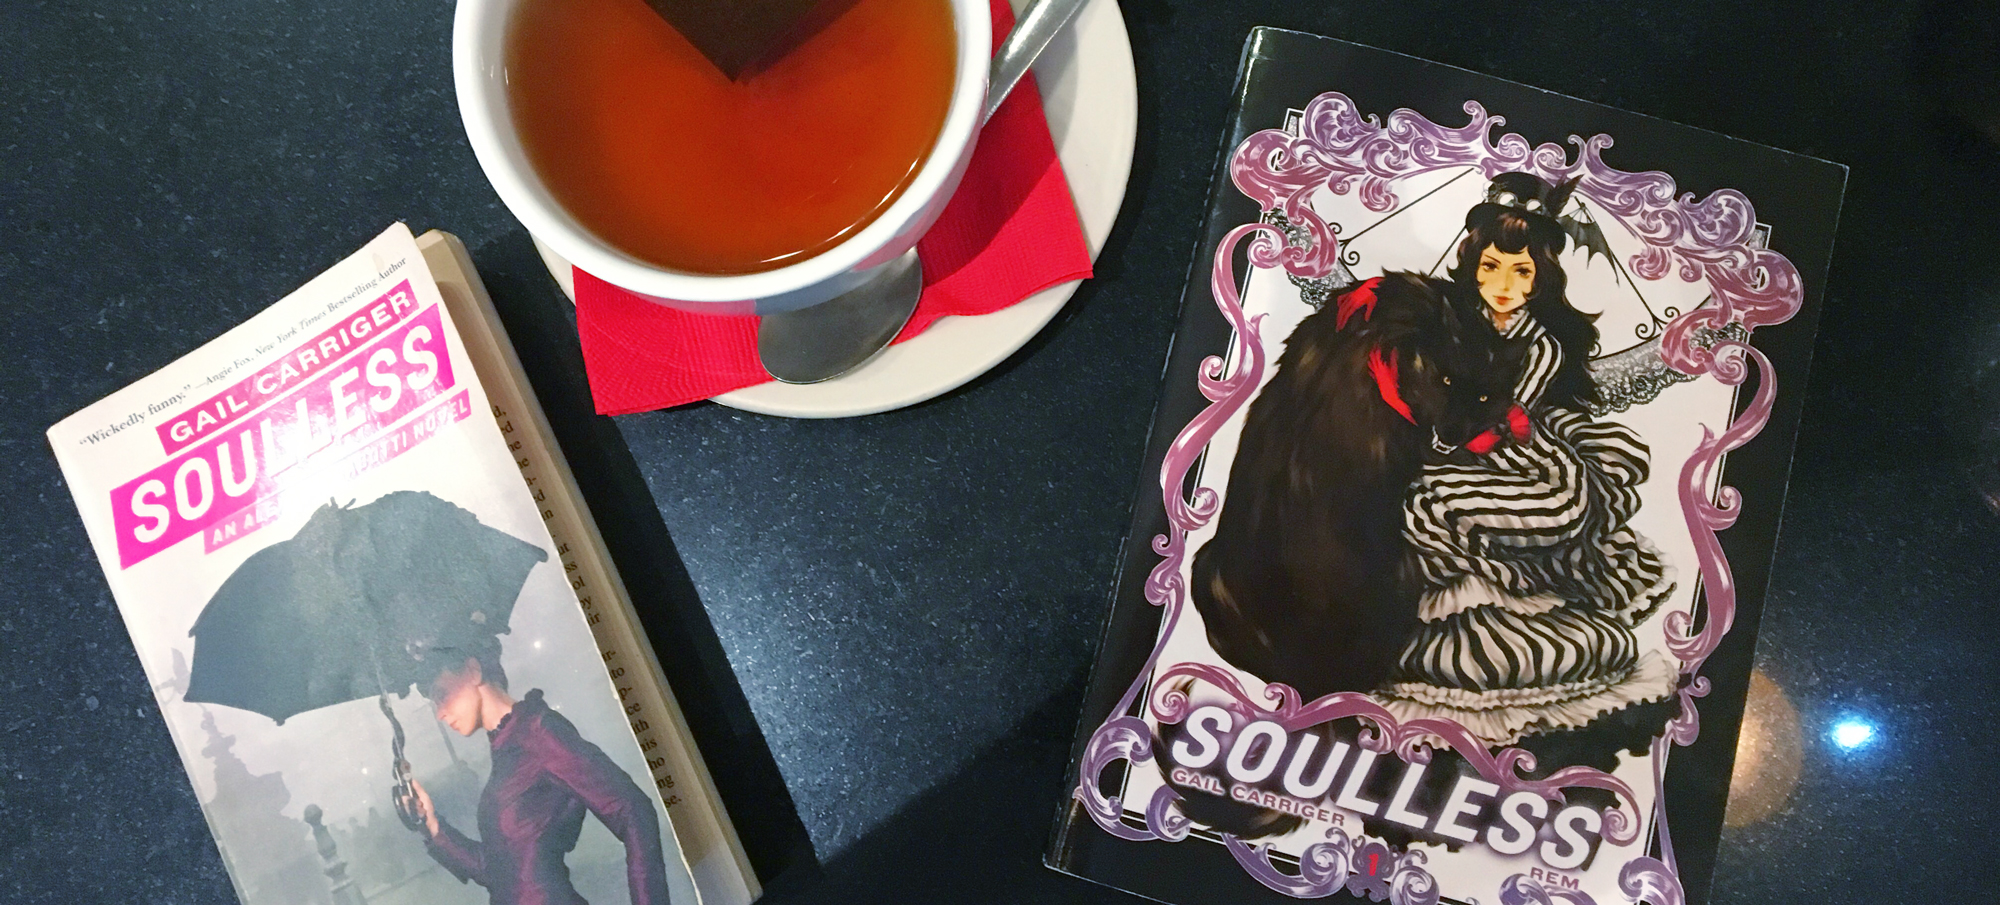 Coral Gables Love Geeky Book Club December Pick: Soulless by Gail Carriger